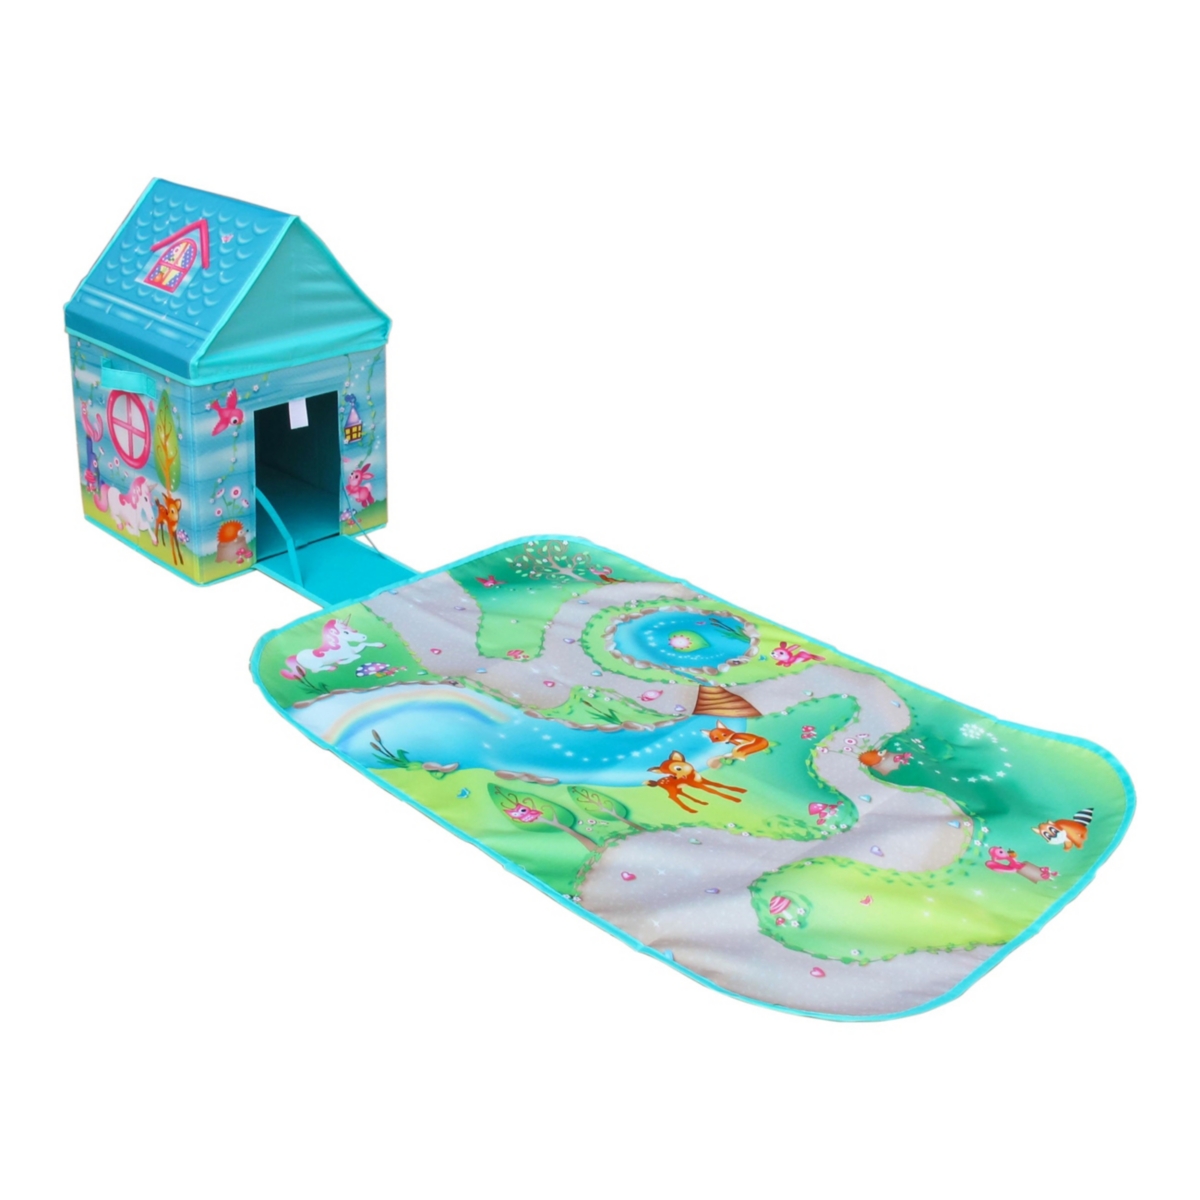 Fun2give Kids' Pop It Up Enchanted Forest Combo Set Play Box With Play Mat And Coloring Set In Multi